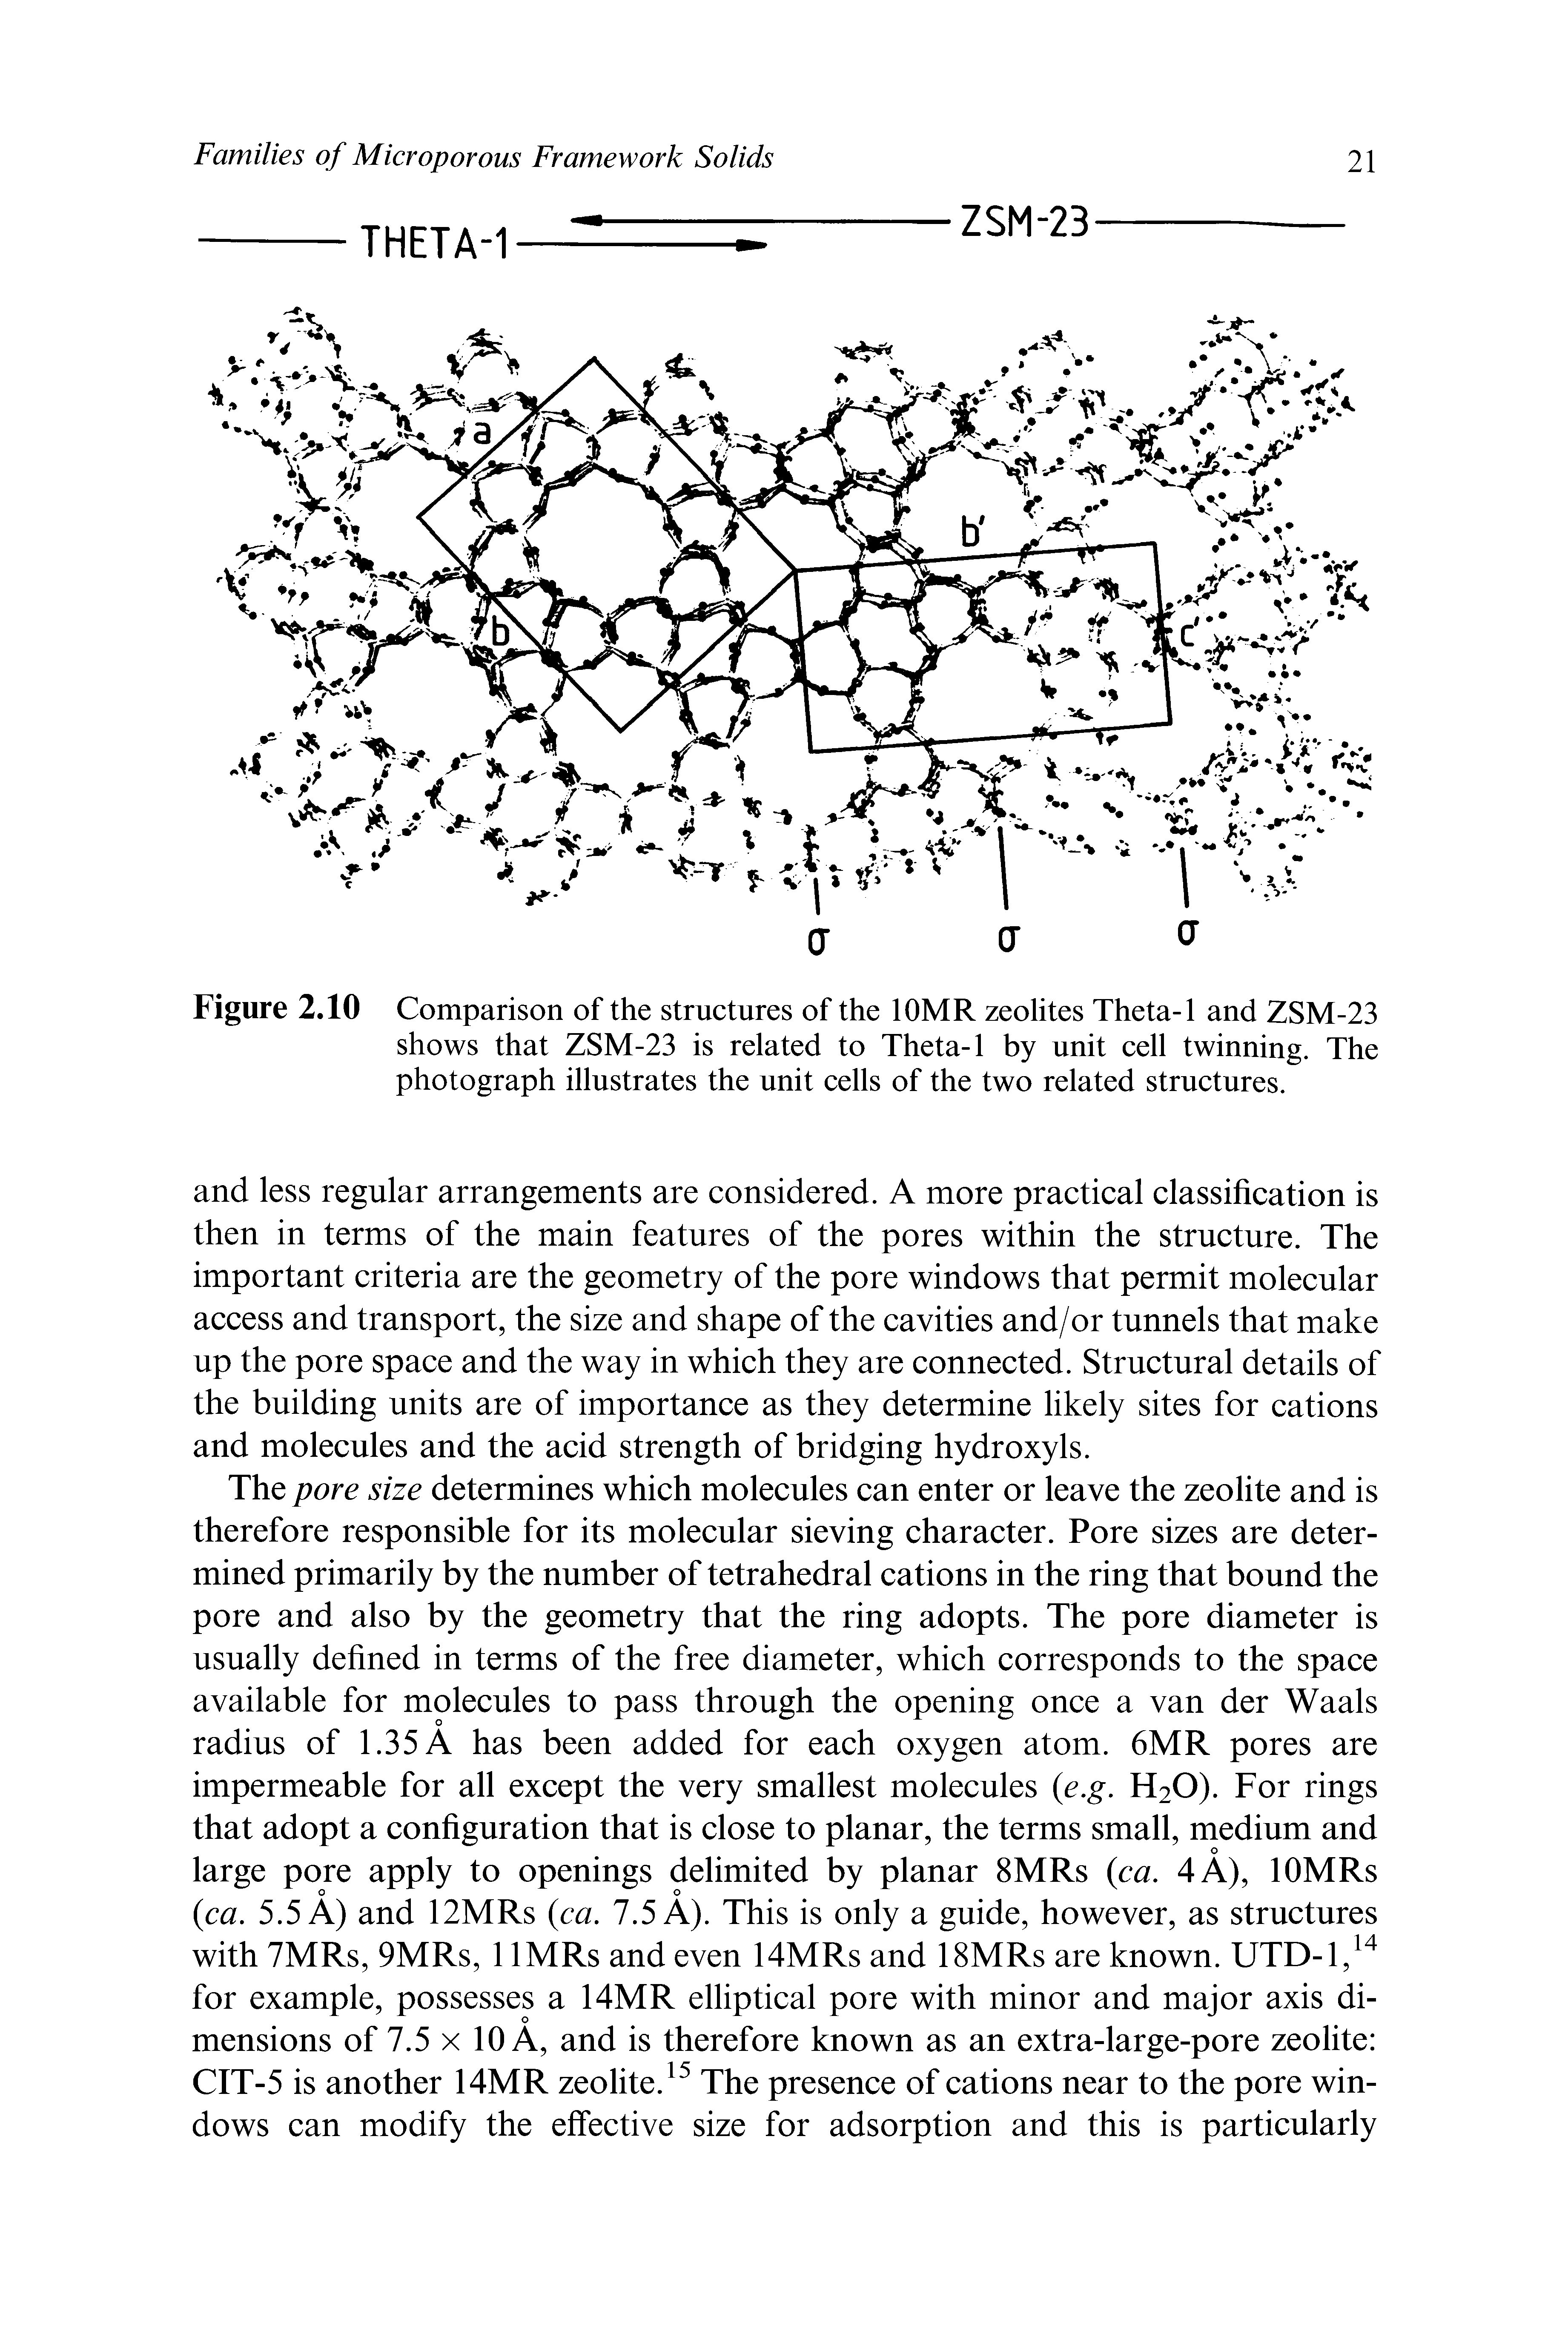 Figure 2.10 Comparison of the structures of the lOMR zeolites Theta-1 and ZSM-23 shows that ZSM-23 is related to Theta-1 by unit cell twinning. The photograph illustrates the unit cells of the two related structures.